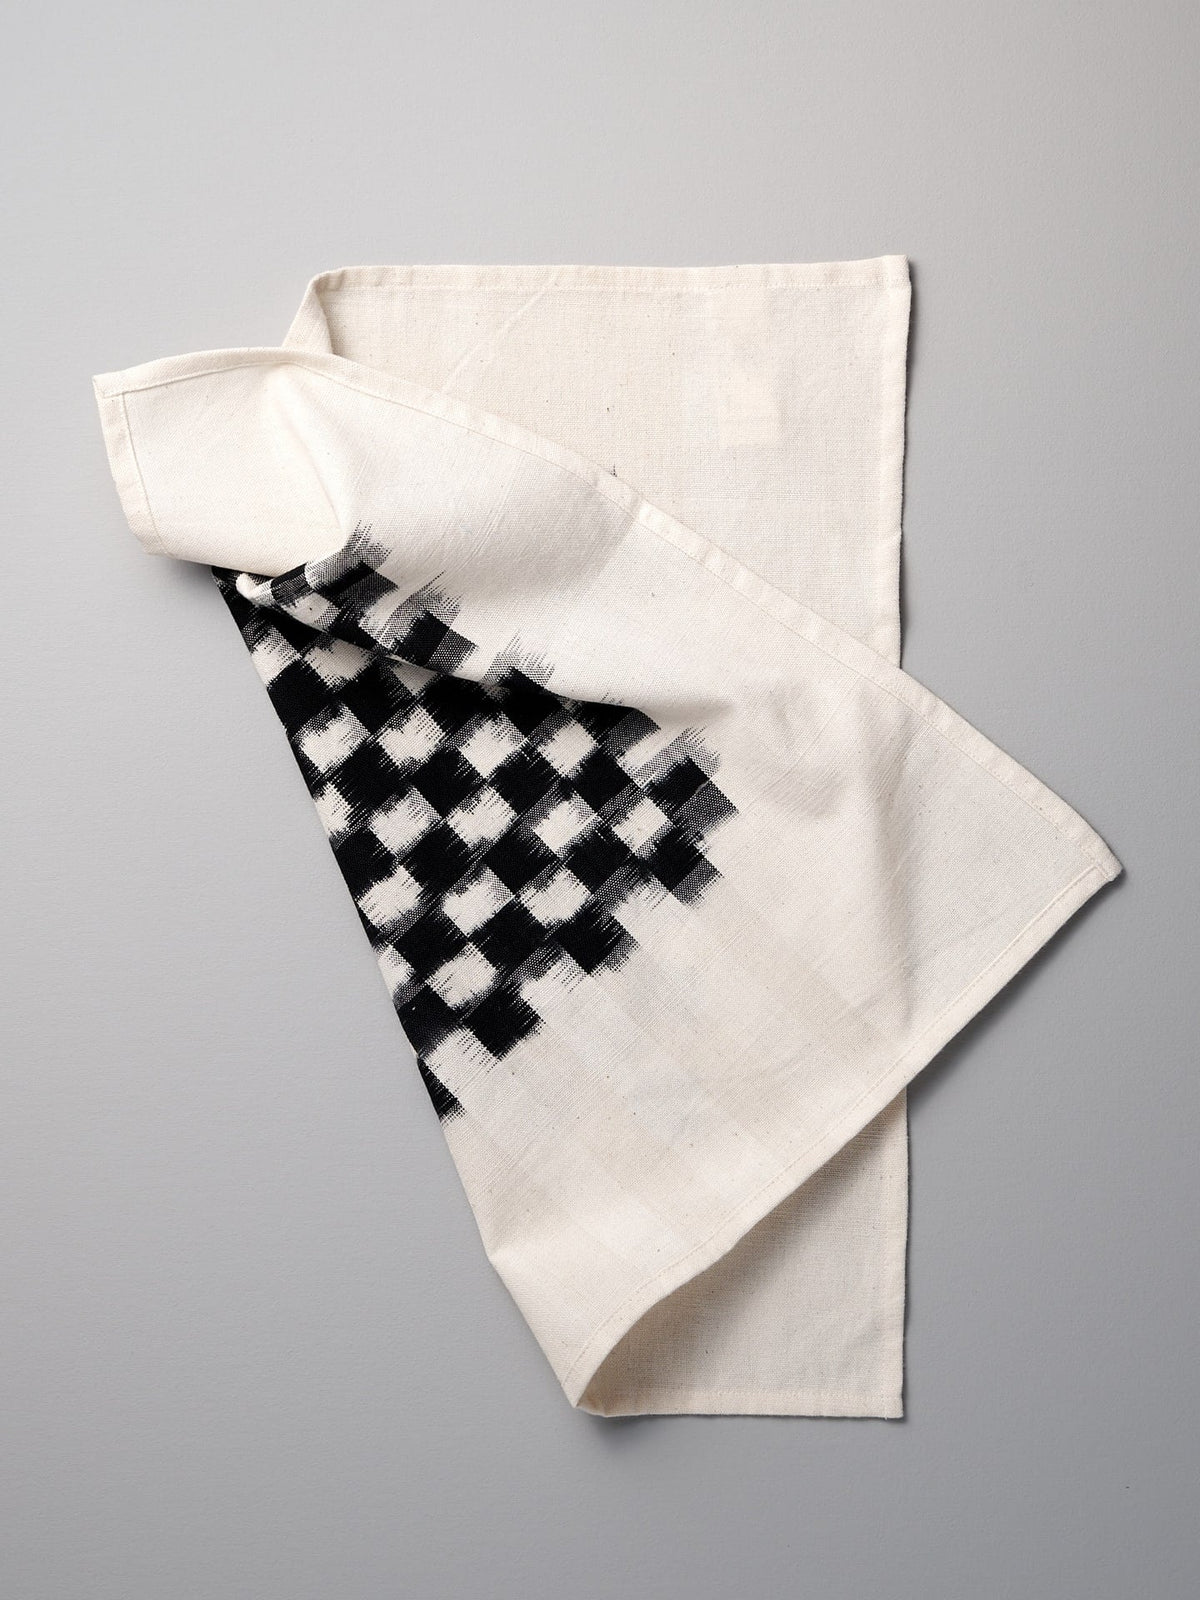 A Stitchwallah towel with a black and white checkered pattern.